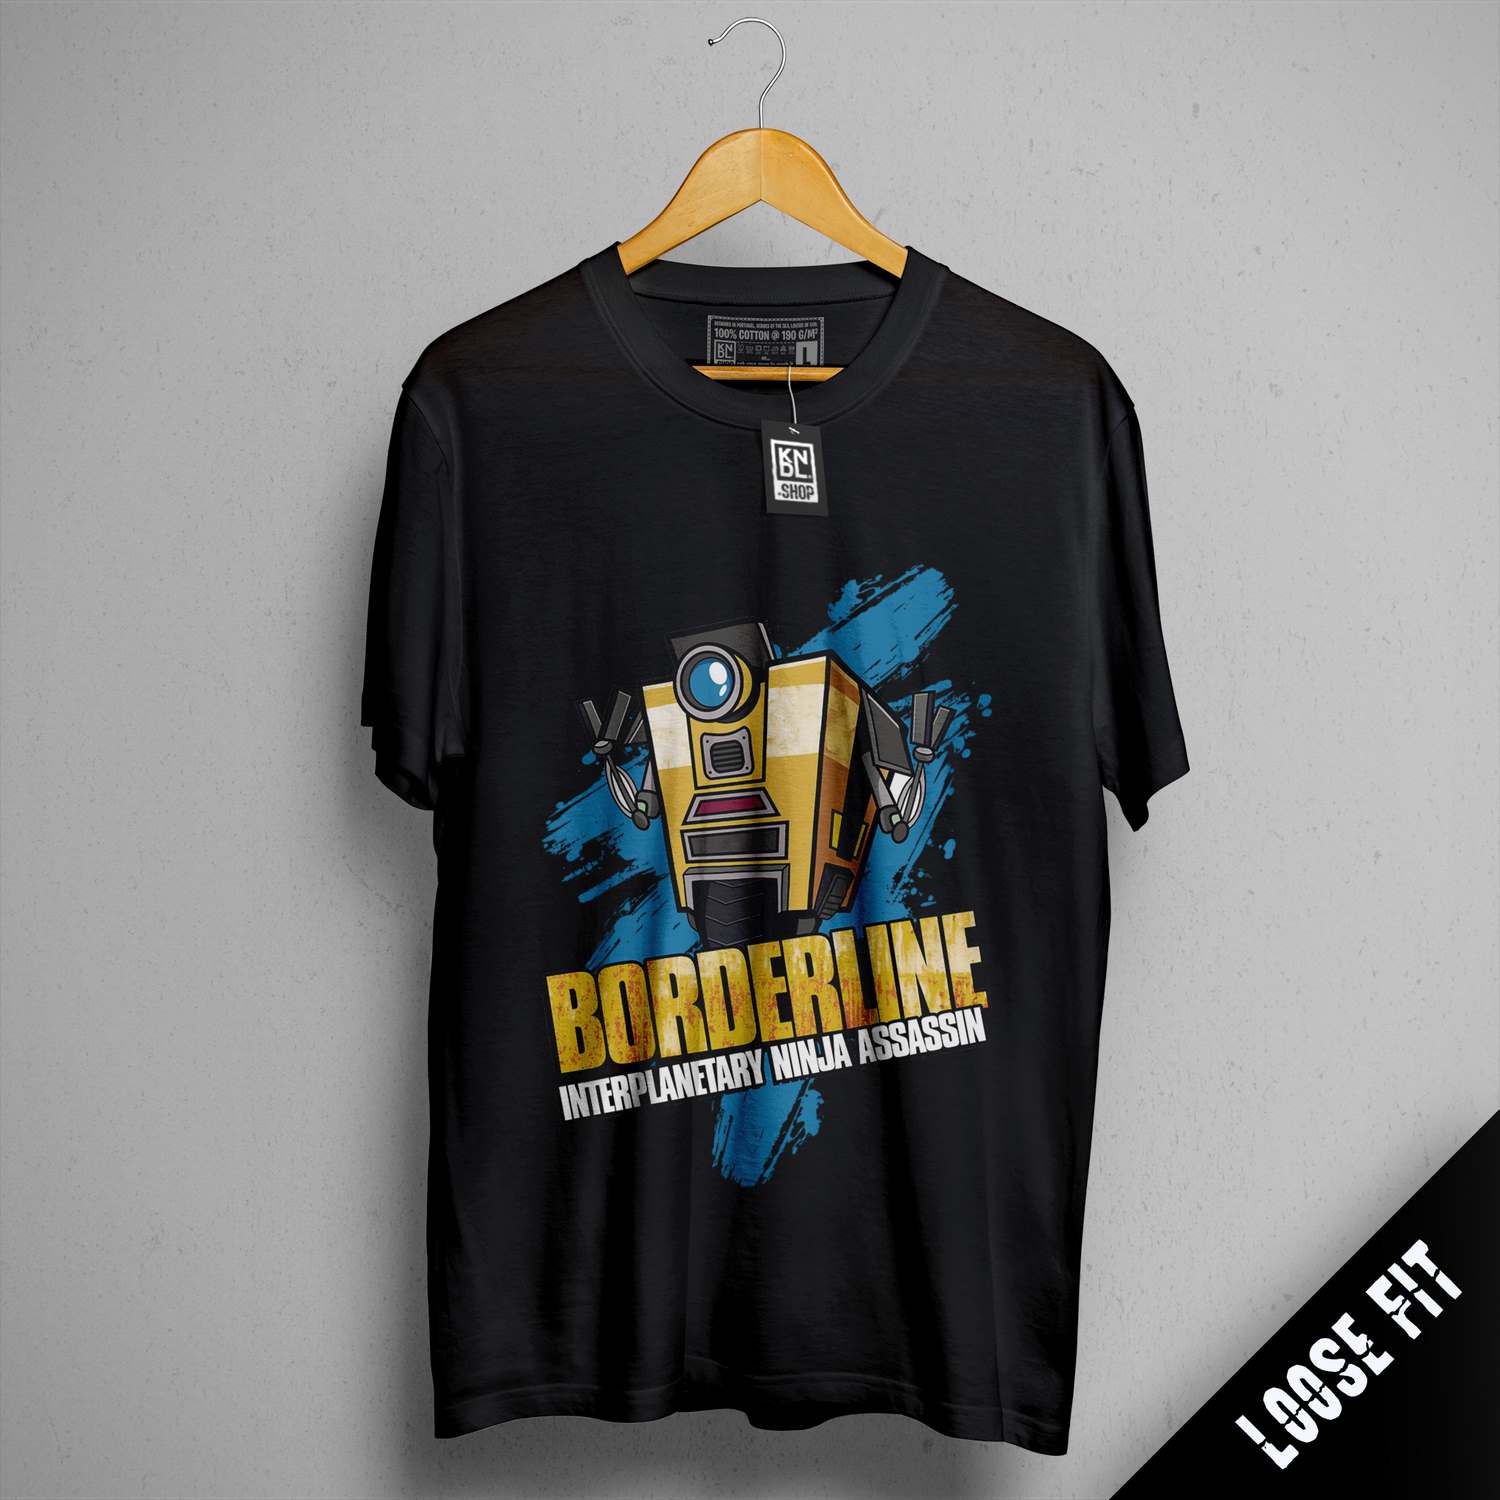 a black shirt with a yellow and blue robot on it